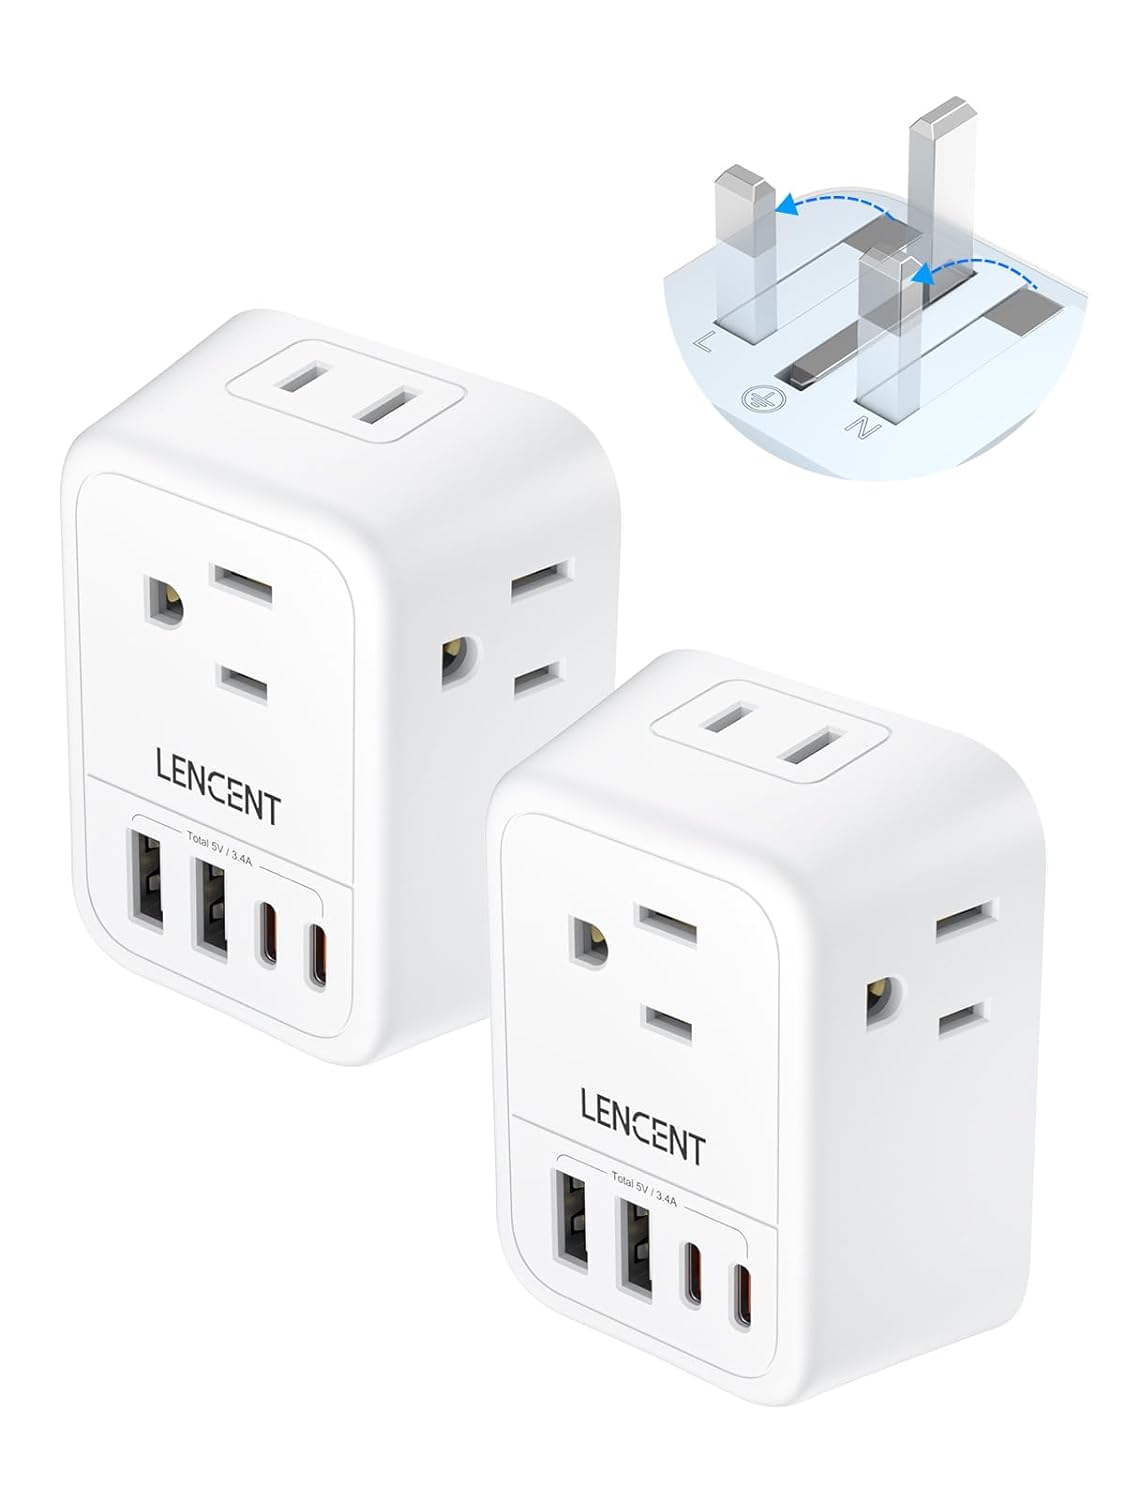 LENCENT 2X UK Plug Travel Adapter, Charger with 4 AC Outlets and 4 USB Ports (2 USB-C), American to English Type G Plug Converter with Earth Outlet, for UK, Ireland, Hong Kong